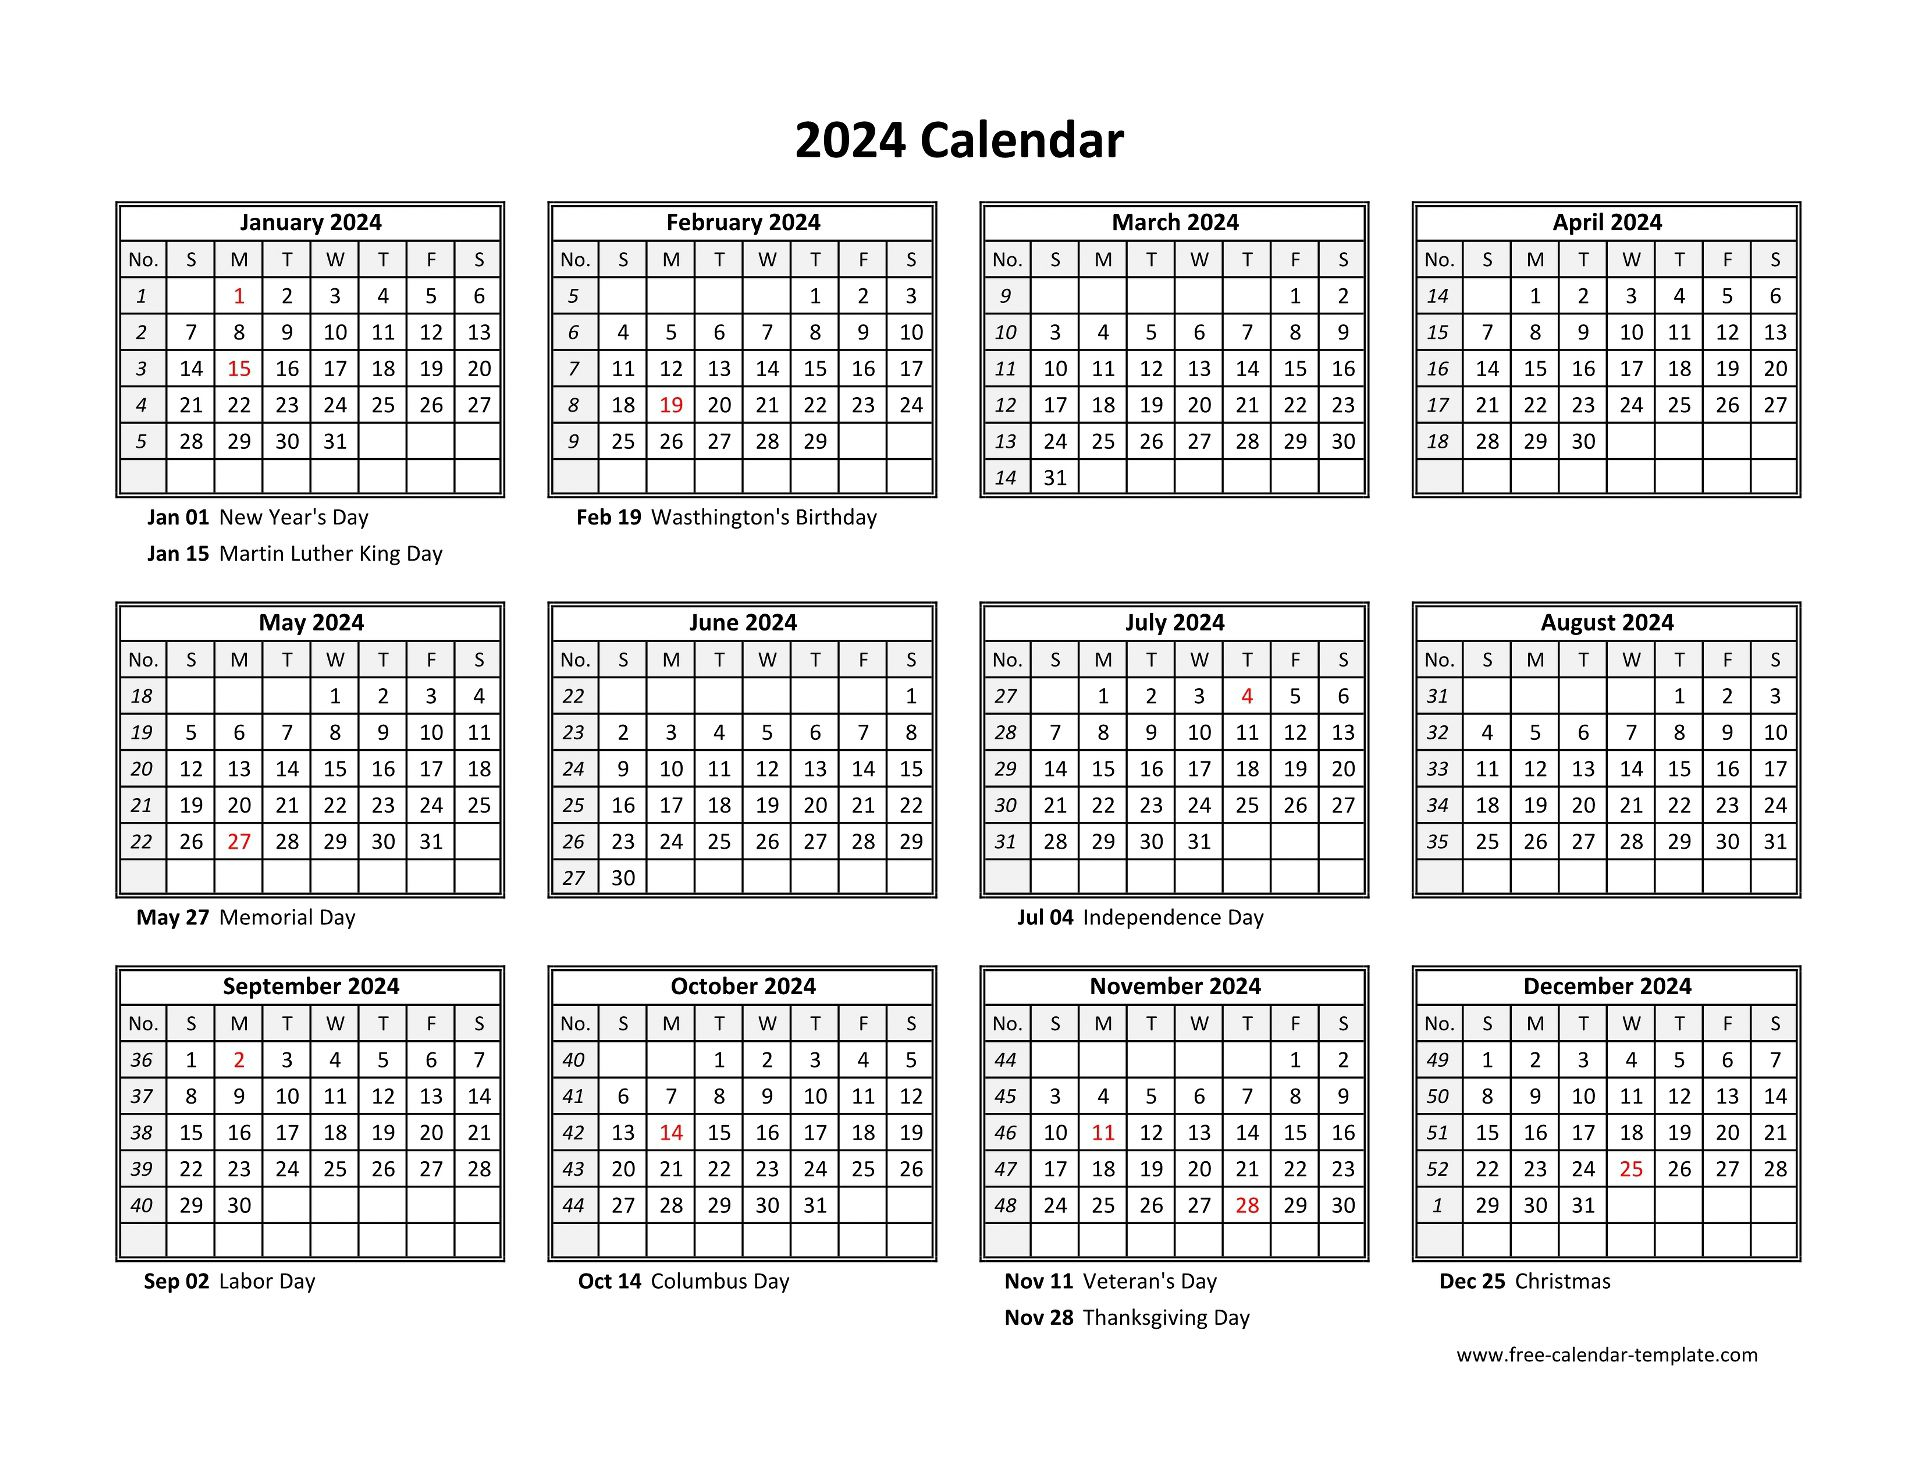 Printable Yearly Calendar 2024 | Free-Calendar-Template for Calendar Pages Printable 2024